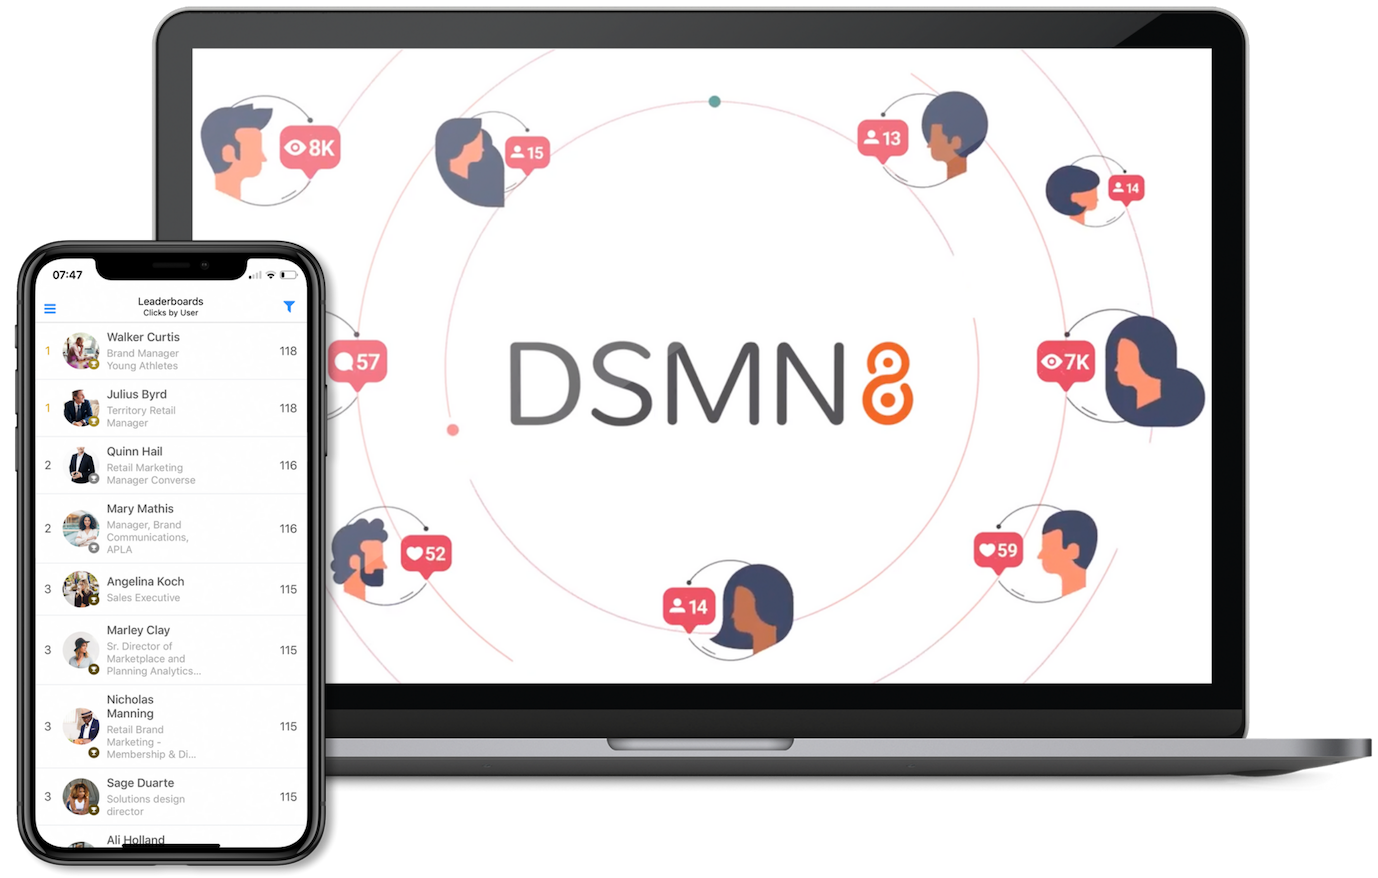 DSMN8 Employee Influencers Platform with Gamification